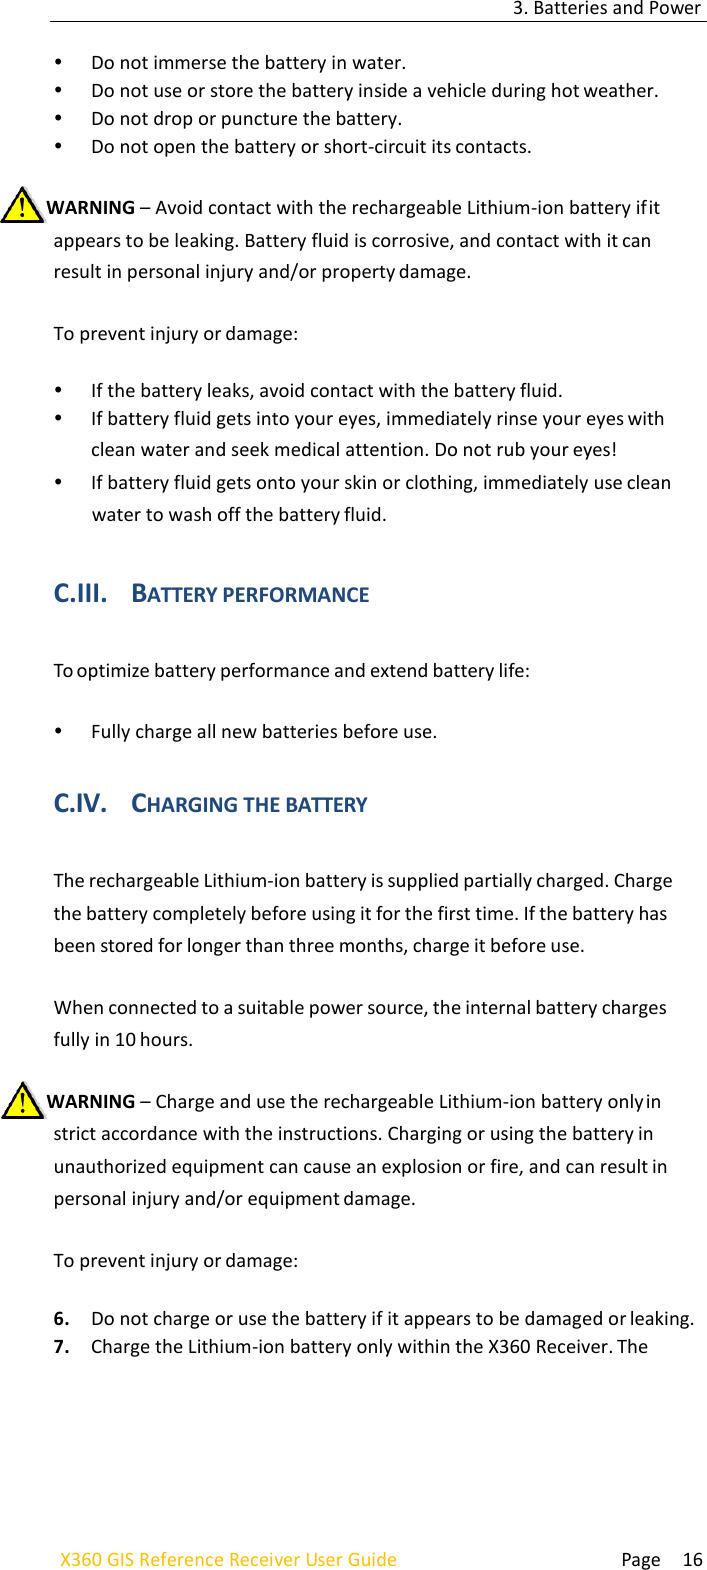 3. Batteries and Power  Page 16 X360 GIS Reference Receiver User Guide     Do not immerse the battery in water.  Do not use or store the battery inside a vehicle during hot weather.  Do not drop or puncture the battery.  Do not open the battery or short-circuit its contacts.  WARNING – Avoid contact with the rechargeable Lithium-ion battery if it appears to be leaking. Battery fluid is corrosive, and contact with it can result in personal injury and/or property damage.  To prevent injury or damage:   If the battery leaks, avoid contact with the battery fluid.  If battery fluid gets into your eyes, immediately rinse your eyes with clean water and seek medical attention. Do not rub your eyes!  If battery fluid gets onto your skin or clothing, immediately use clean water to wash off the battery fluid.   C.III. BATTERY PERFORMANCE  To optimize battery performance and extend battery life:   Fully charge all new batteries before use.  C.IV. CHARGING THE BATTERY  The rechargeable Lithium-ion battery is supplied partially charged. Charge the battery completely before using it for the first time. If the battery has been stored for longer than three months, charge it before use.  When connected to a suitable power source, the internal battery charges fully in 10 hours.  WARNING – Charge and use the rechargeable Lithium-ion battery only in strict accordance with the instructions. Charging or using the battery in unauthorized equipment can cause an explosion or fire, and can result in personal injury and/or equipment damage.  To prevent injury or damage:  6. Do not charge or use the battery if it appears to be damaged or leaking. 7. Charge the Lithium-ion battery only within the X360 Receiver. The 